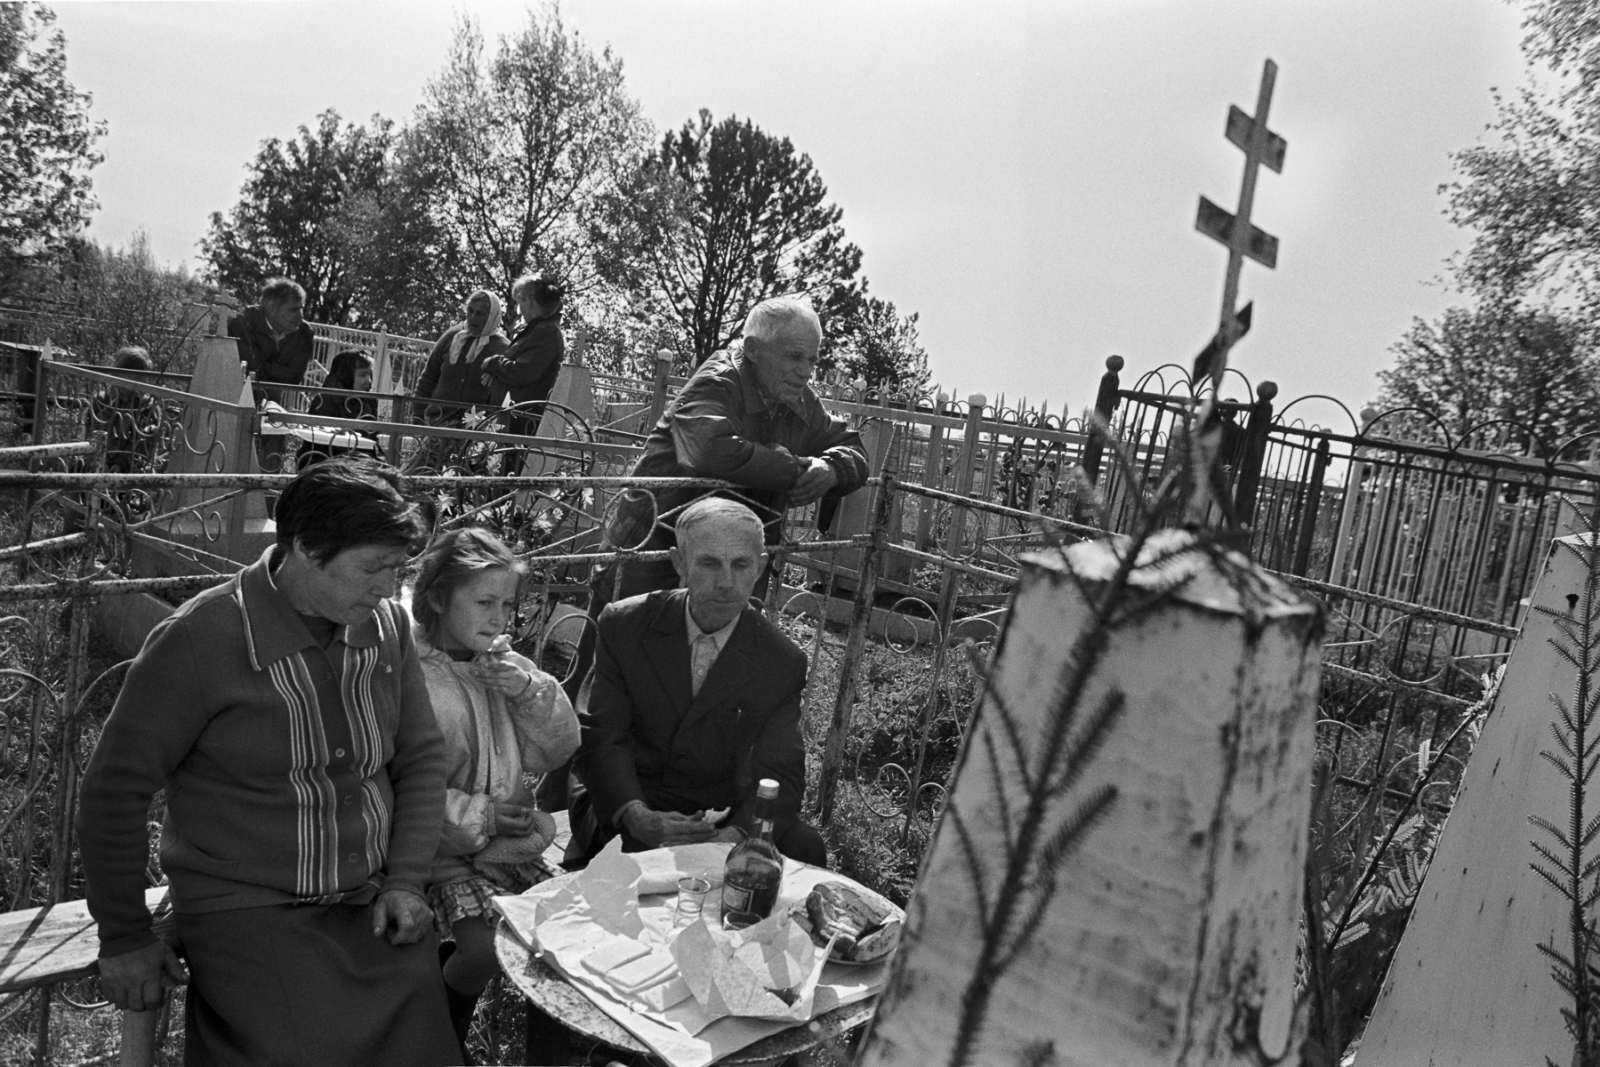 Russia - The Village of Anufrievo - Villagers honor the dead with food, drink, and impromptu...